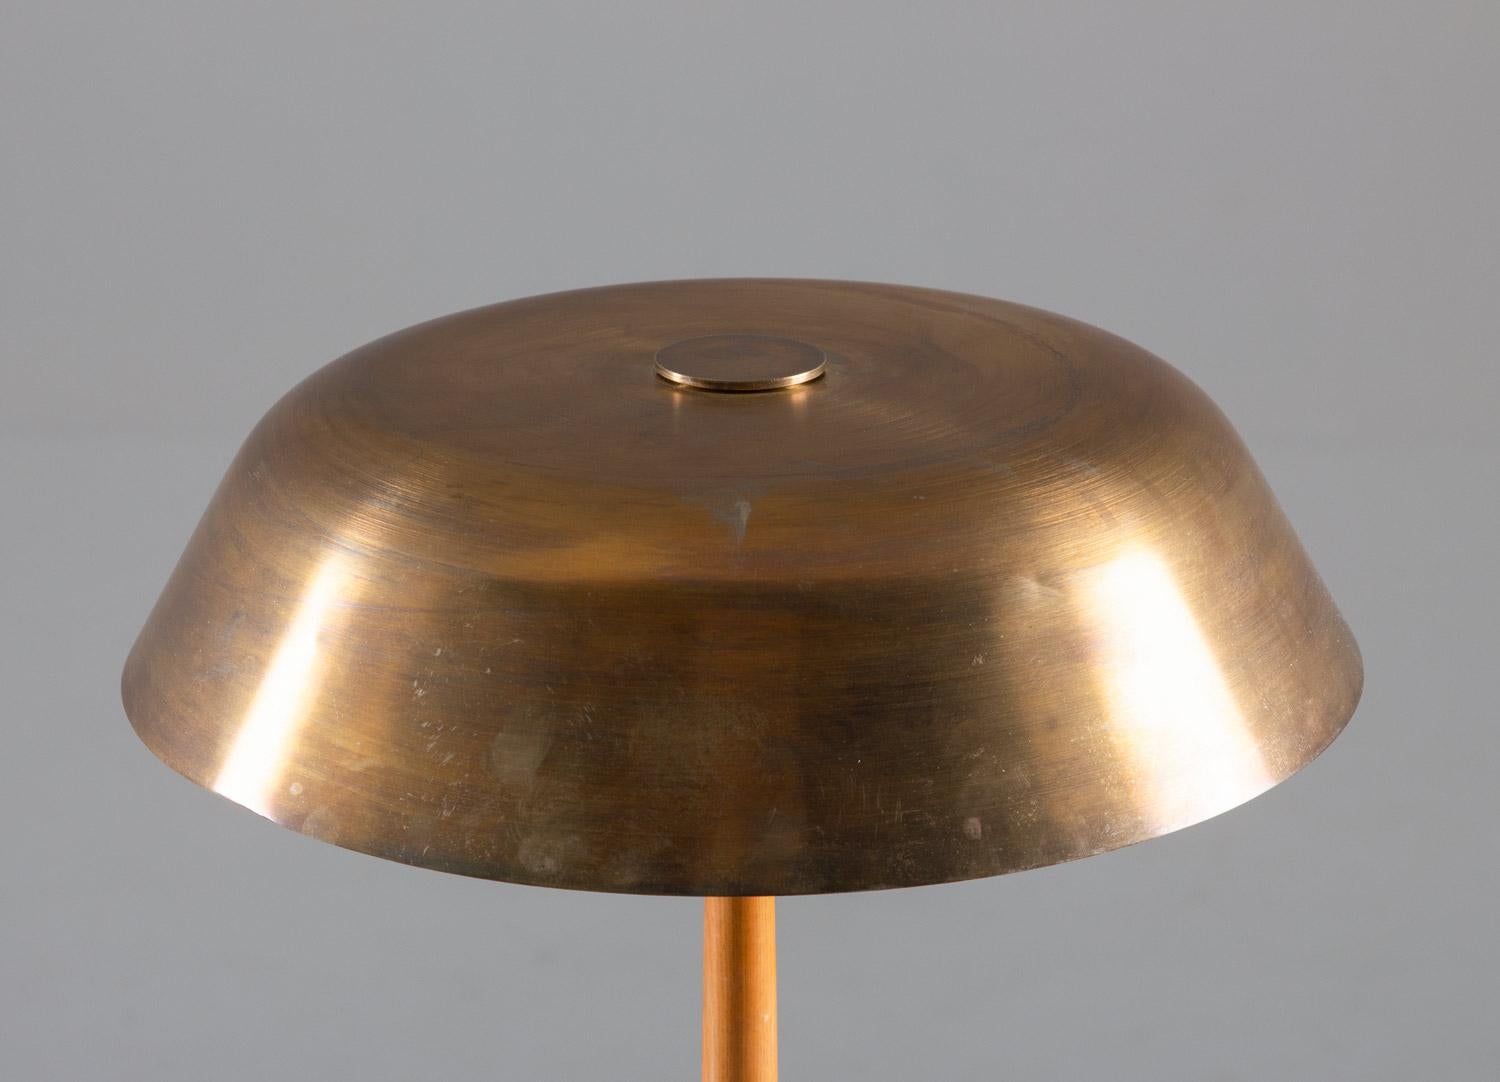 Swedish Midcentury Table Lamp in Brass by Harald Notini for Böhlmarks In Good Condition For Sale In Karlstad, SE